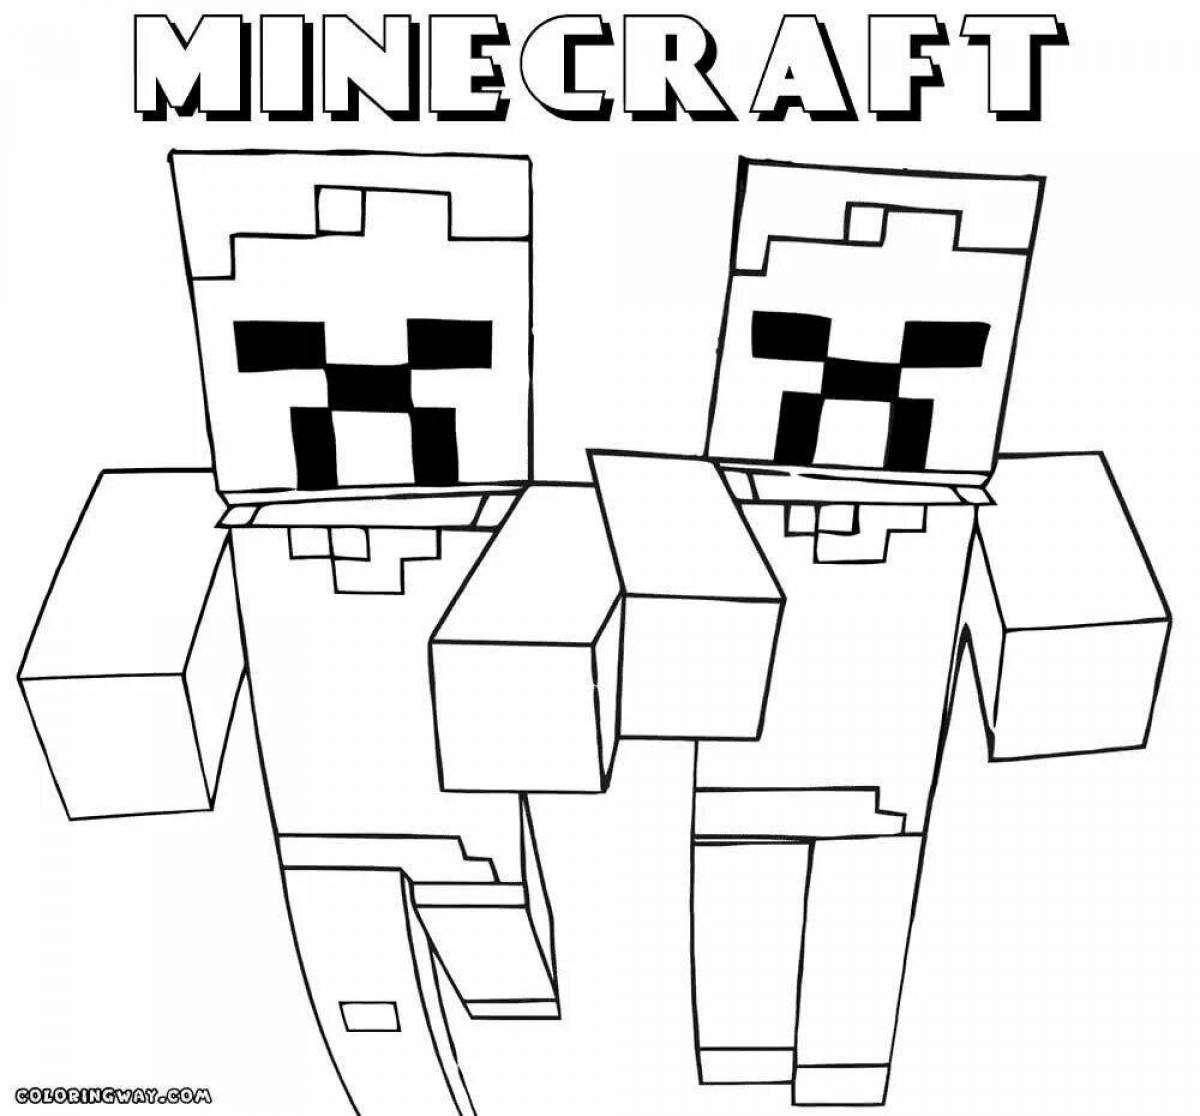 Colorful minecraft character coloring page